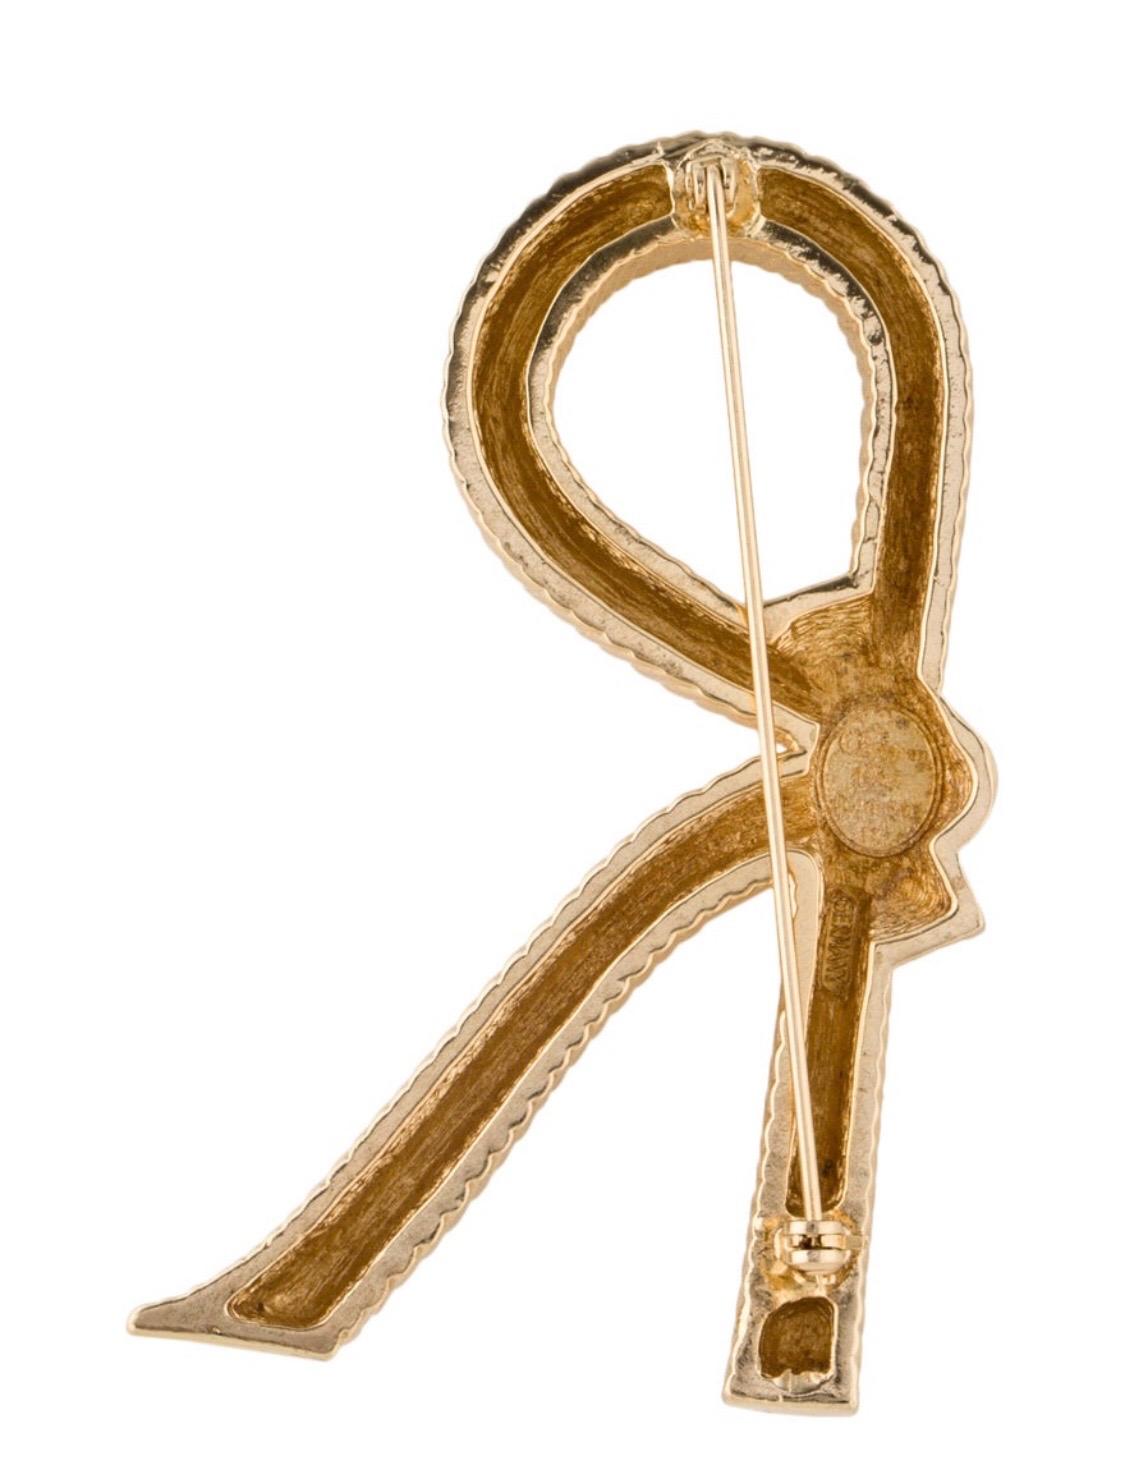 Make a statement with our CHRISTIAN DIOR Vintage Initial 'R' Crystal Accented Brooch. Its the perfect accent piece for any look. Pin her on your hat or handbag or your favorite blazer. Designed by Christian Dior in the 1960s marked Christian Dior